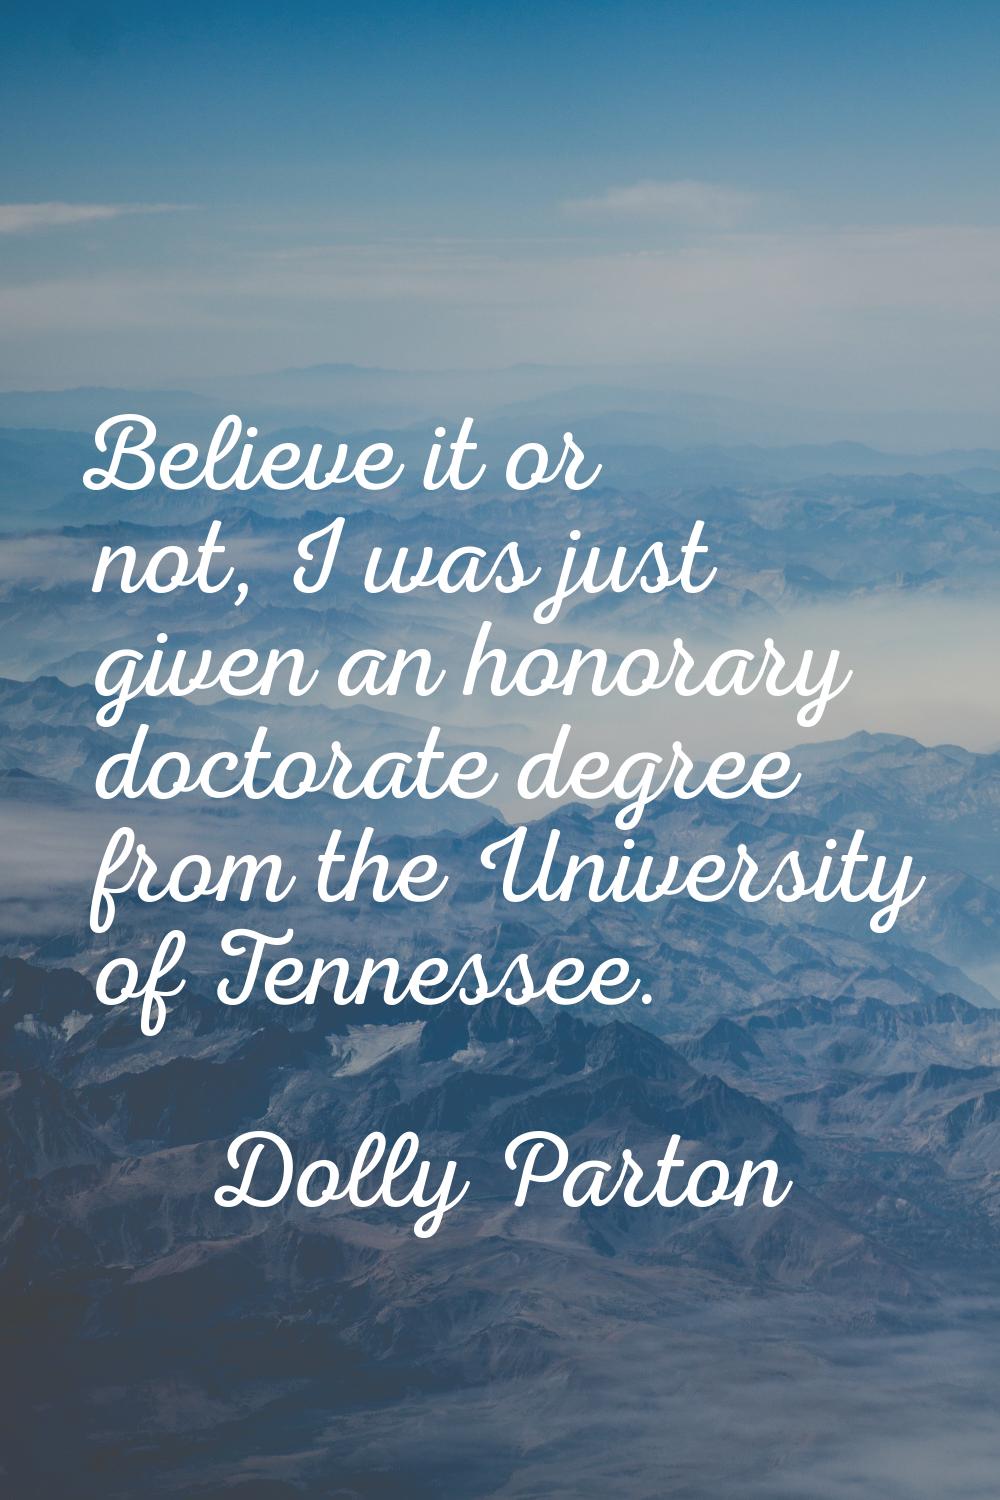 Believe it or not, I was just given an honorary doctorate degree from the University of Tennessee.